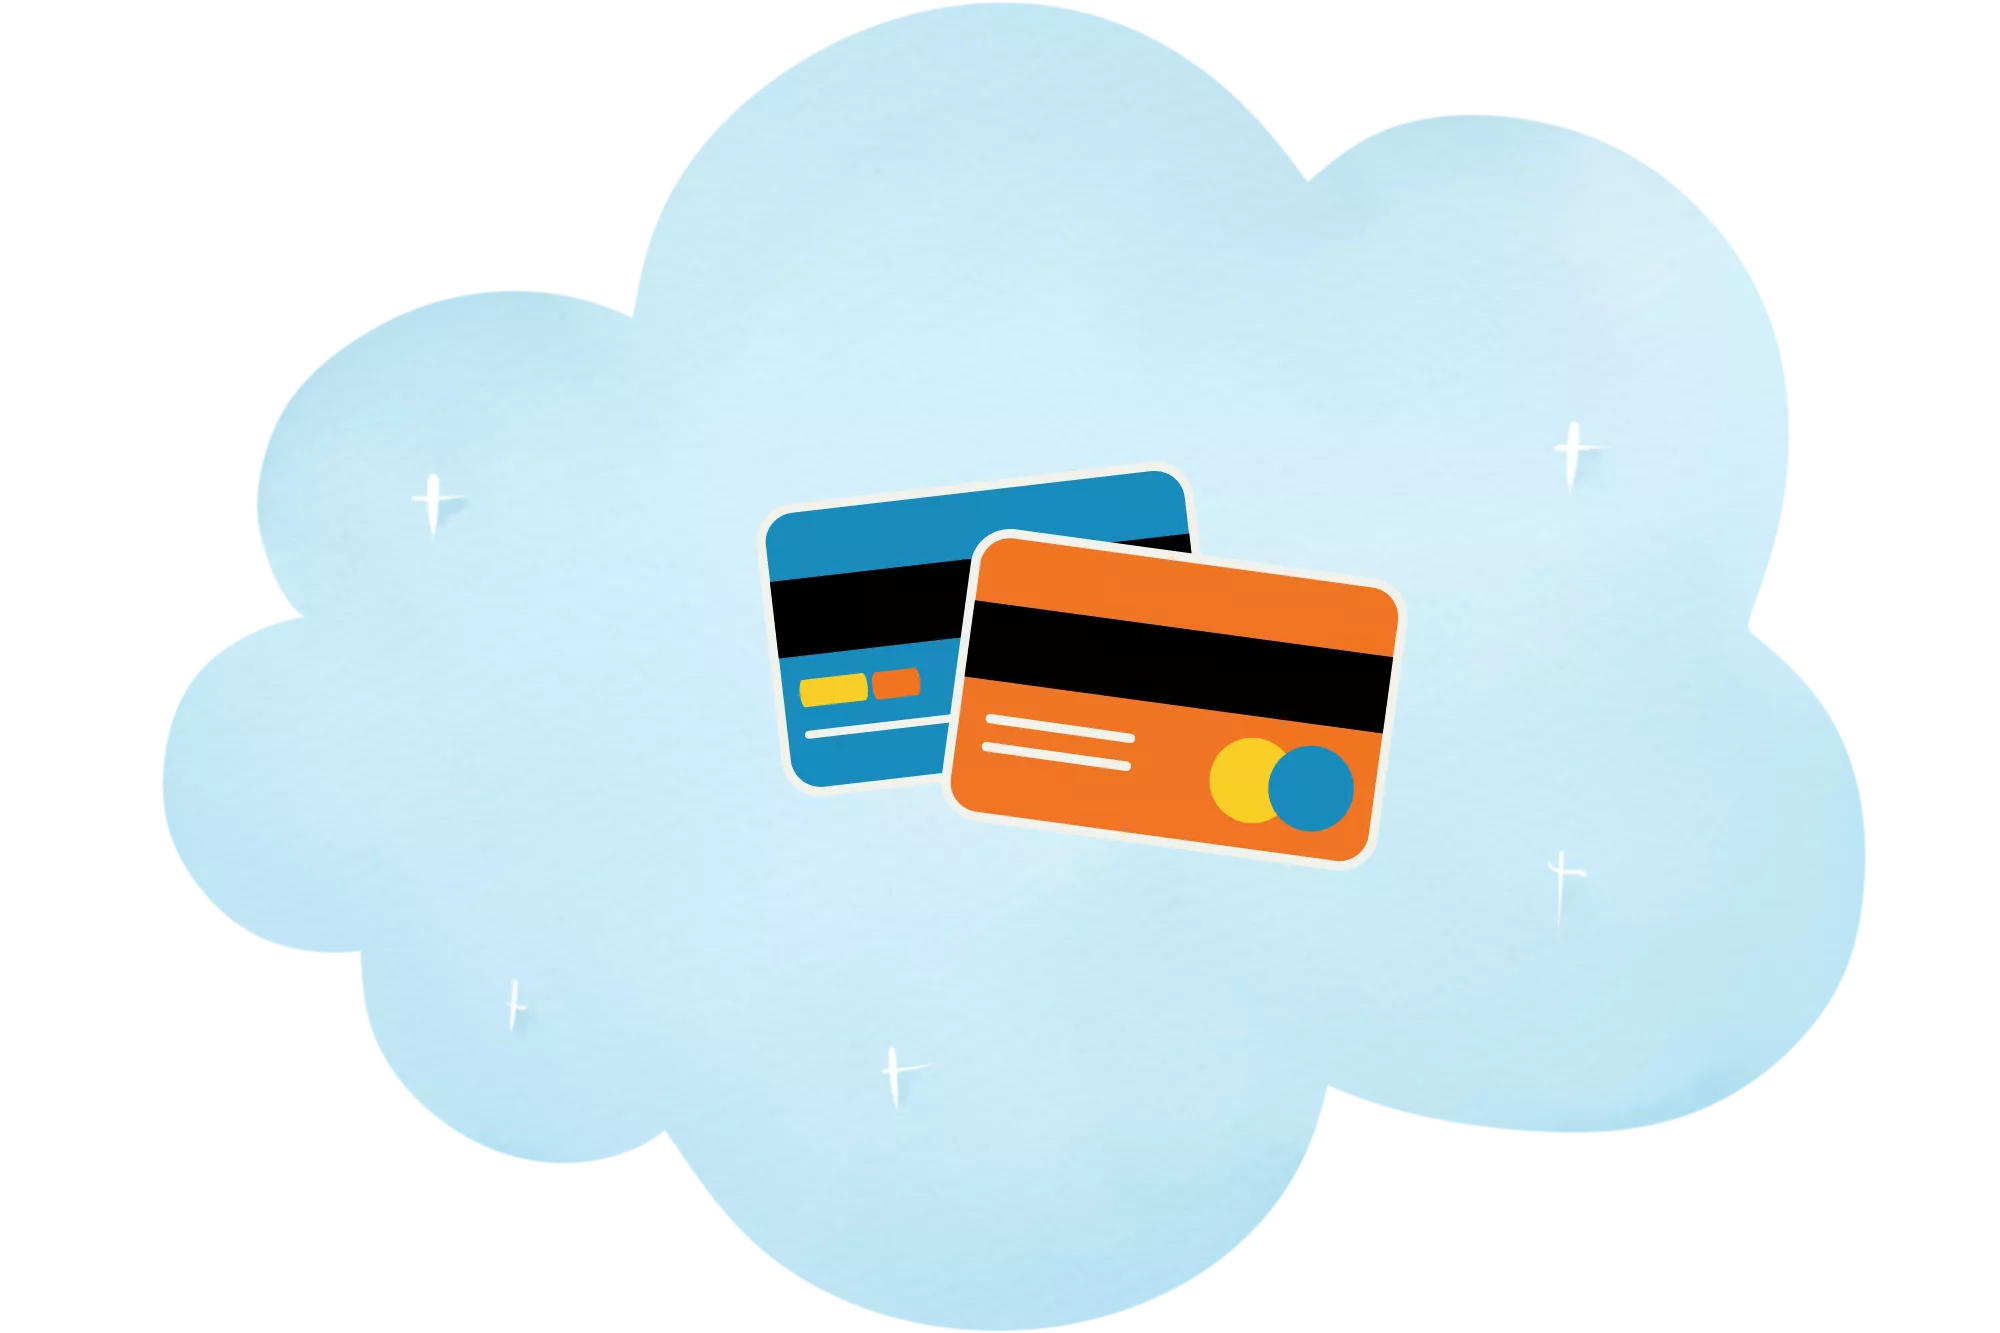 A cloud with credit cards on it to represent payment through WooCommerce Authorize.net integration.